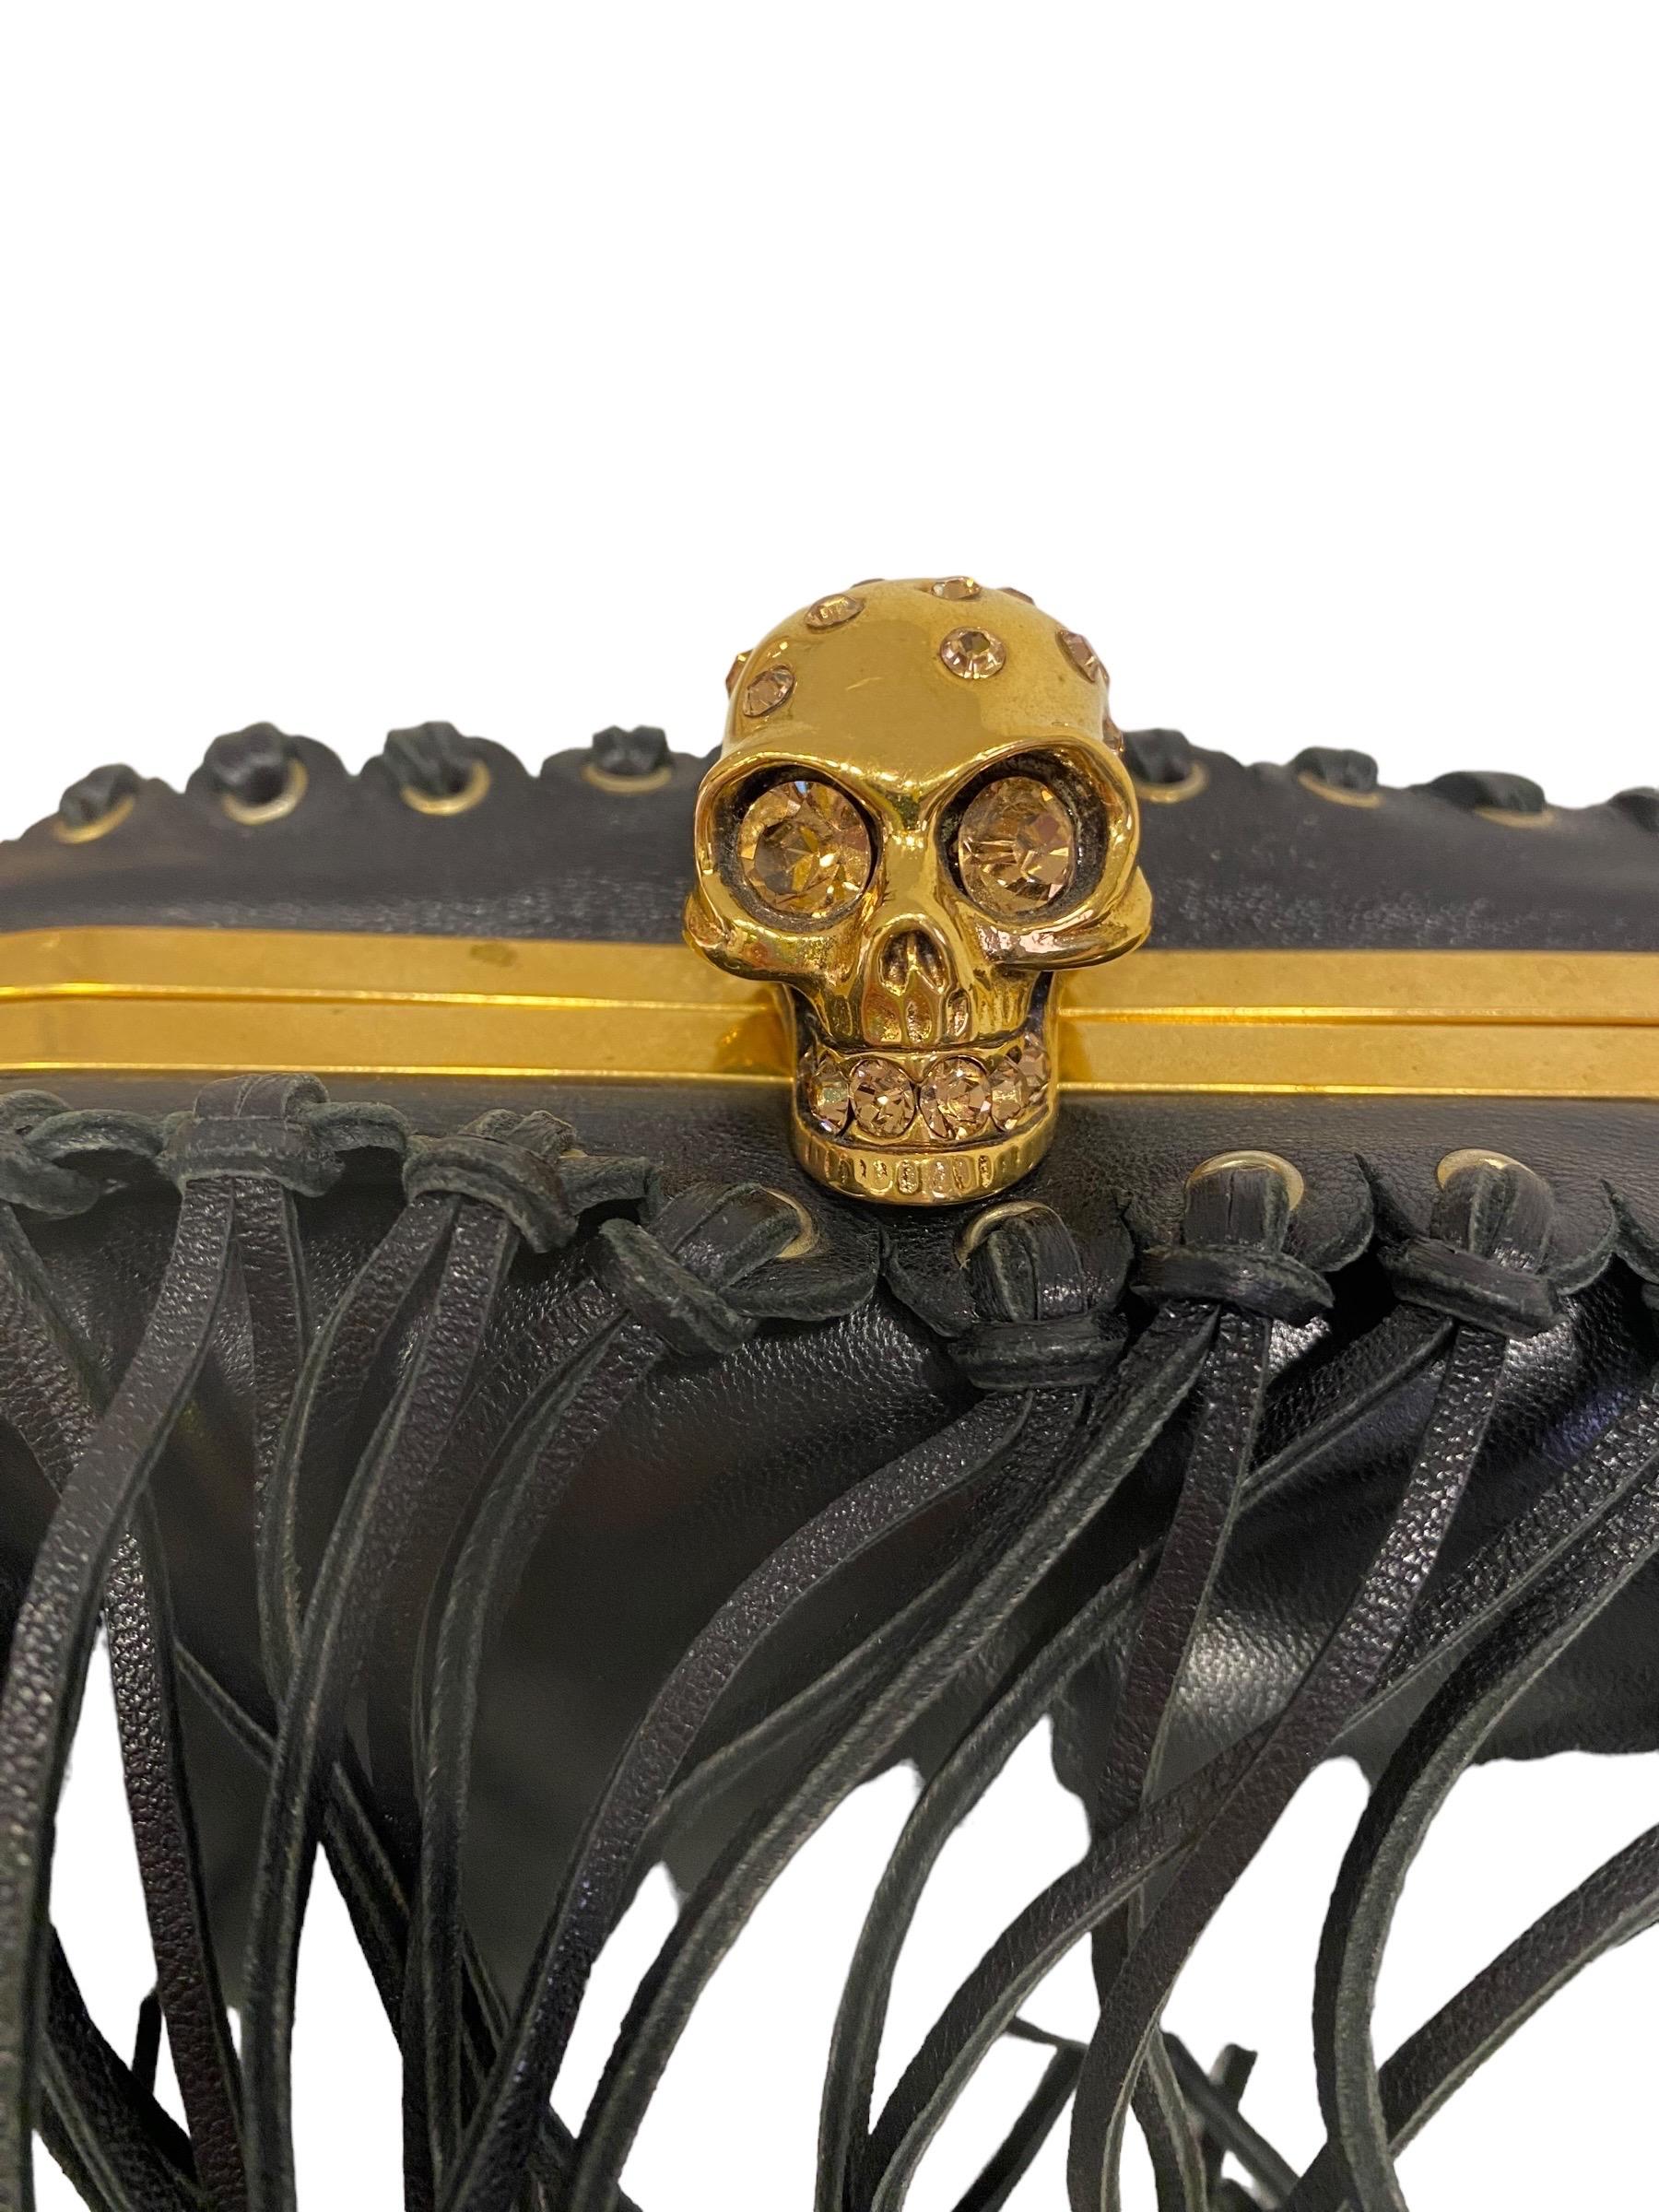 Clutch signed Aleander McQueen, Skull model, made in black leather covered by fringes with golden hardware.

Equipped with an interlocking closure, internally lined in smooth leather, roomy for the essentials. It is presented in good condition.